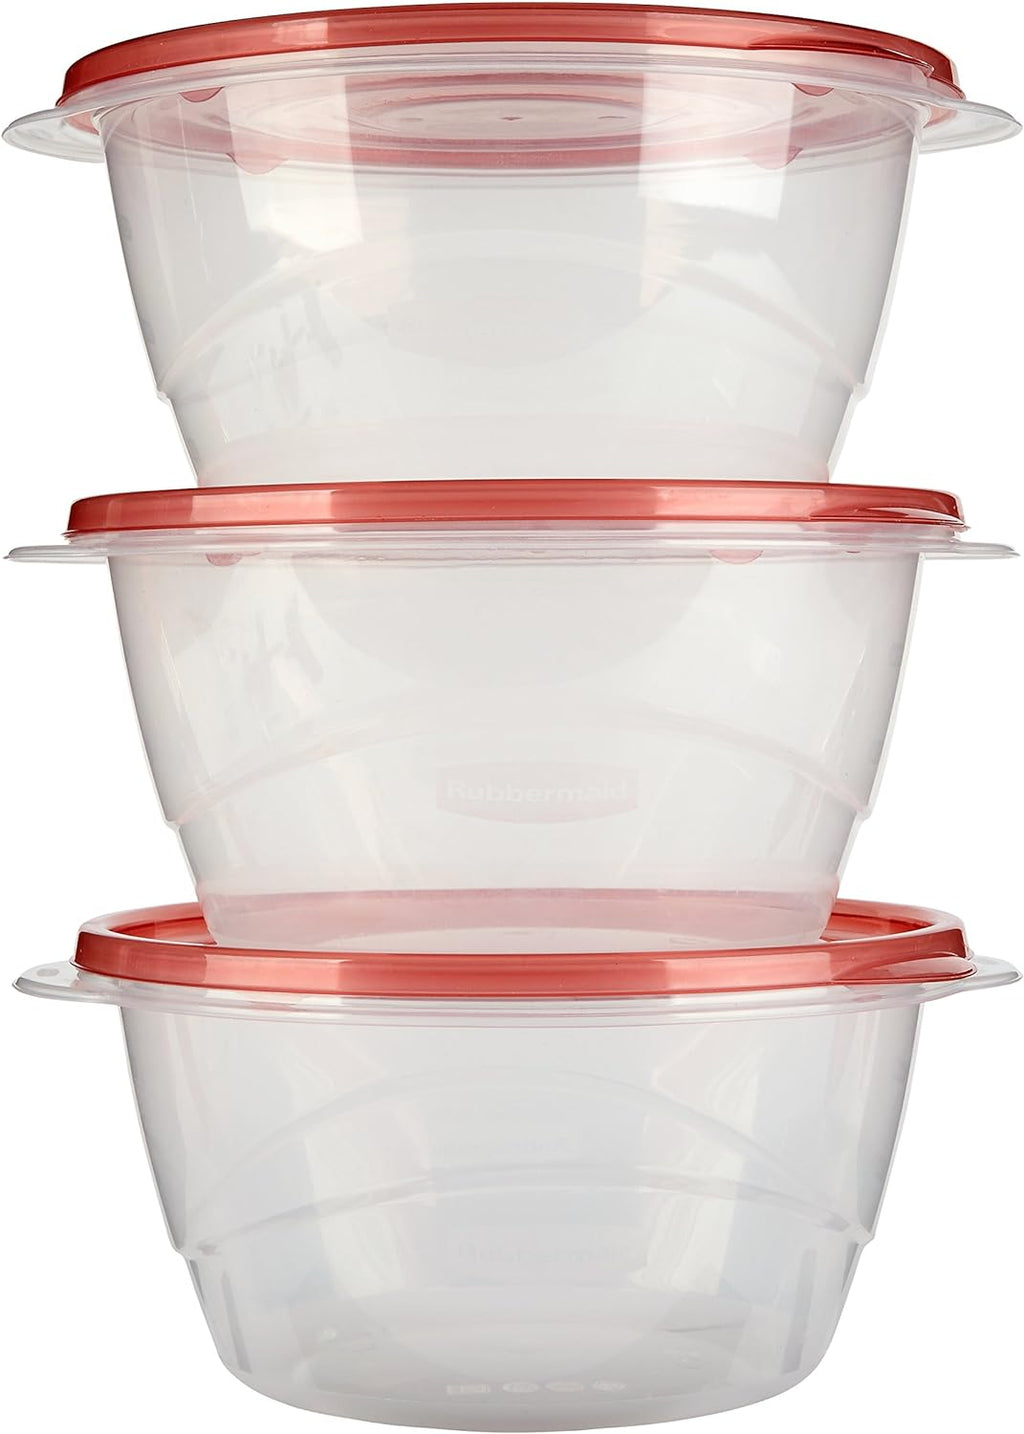 Rubbermaid 10 cups Clear Food Storage Container 1 pk